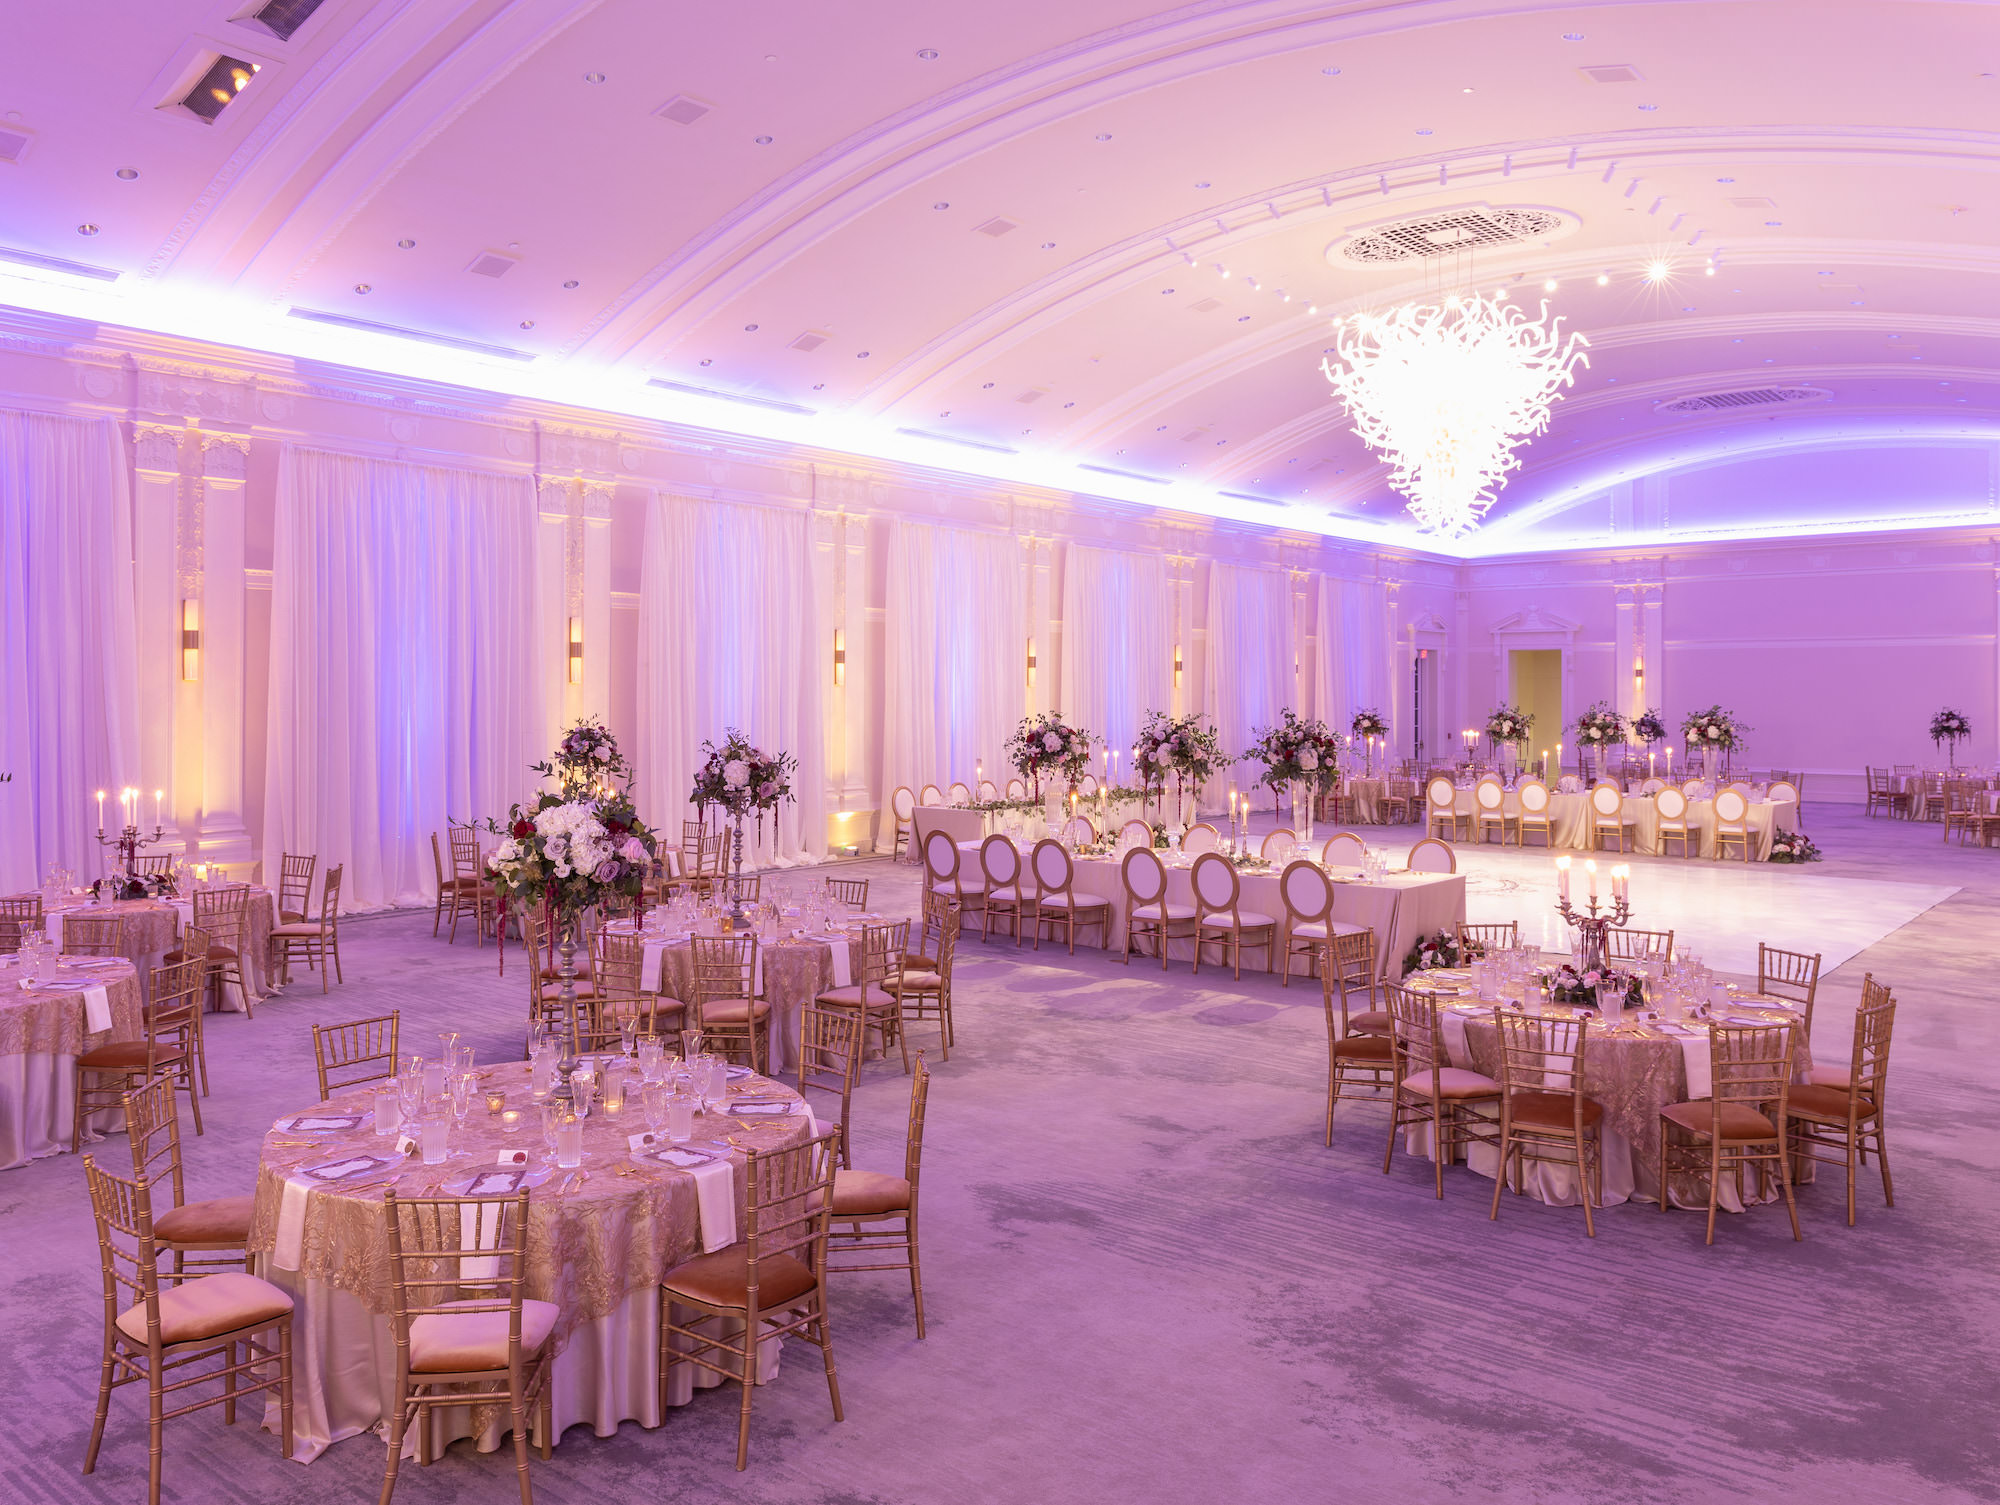 Elegant Royal Glam Gatsby Wedding Reception Decor, Purple Uplighting, White Ballroom Dance Floor with Custom Gold Monogram, Long Table with Champagne Linen, Gold and Ivory Dining Chairs, Tall Glass Vases with Lush Greenery, White, Mauve, Burgundy and Blush Pink Roses with Red Hanging Amaranthus Flower Centerpieces | Tampa Bay Wedding Planner and Designer John Campbell Weddings | St. Pete Wedding Rentals Kate Ryan Event Rentals